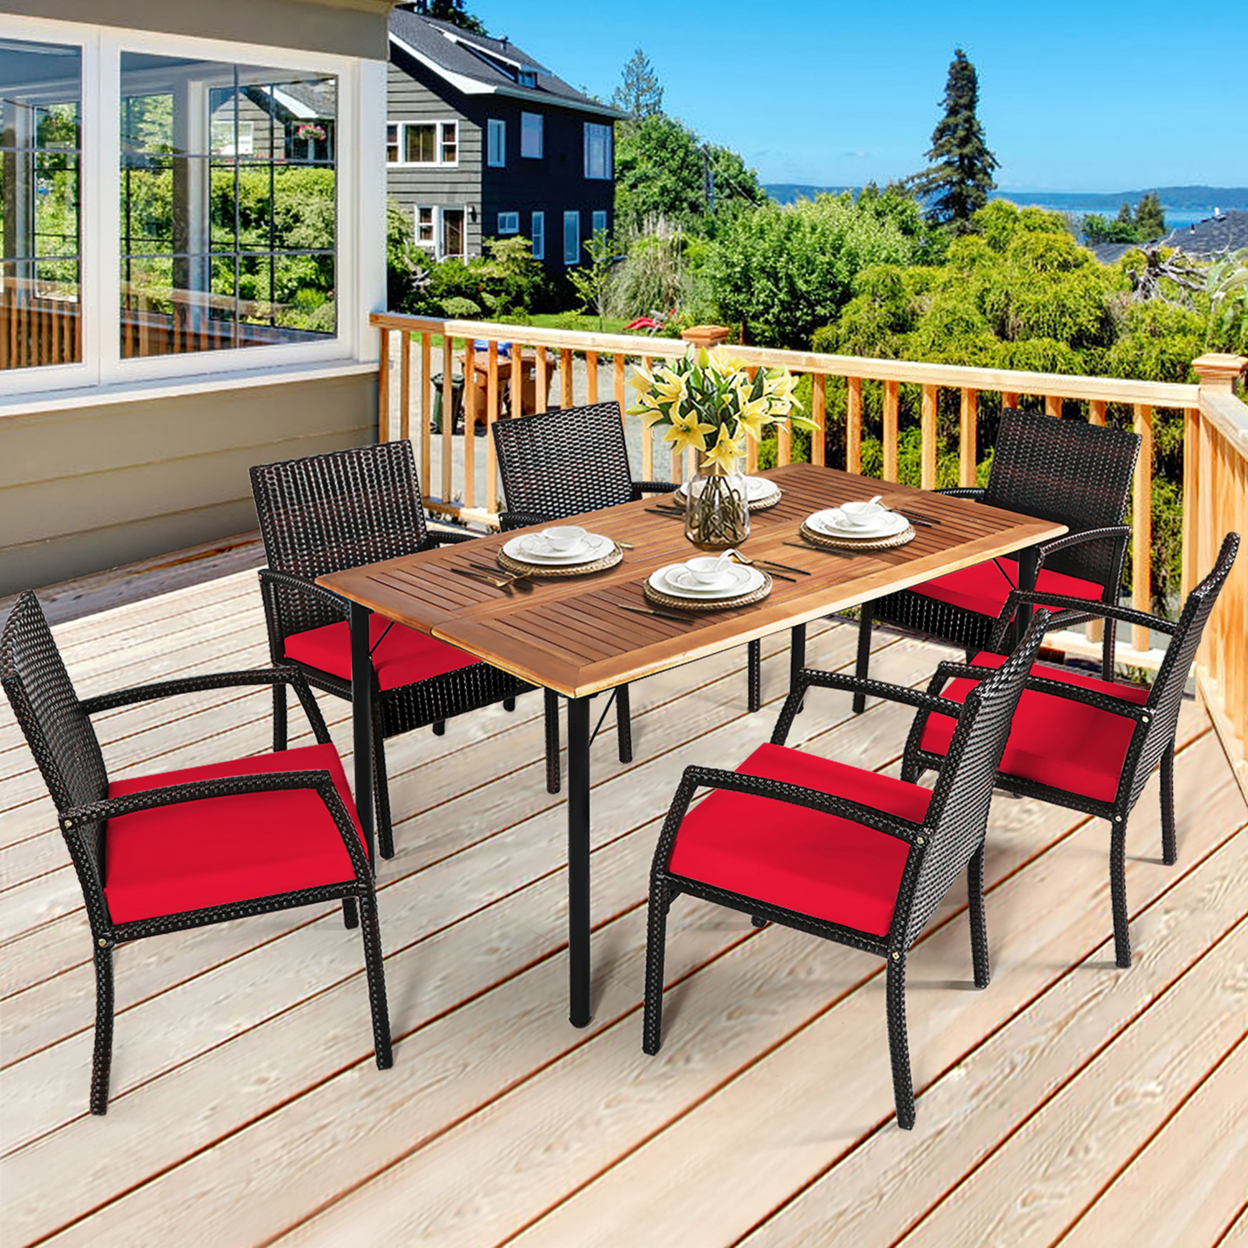 7PCS Patio Dining Furniture Set Yard W/ Wooden Tabletop Red Cushions